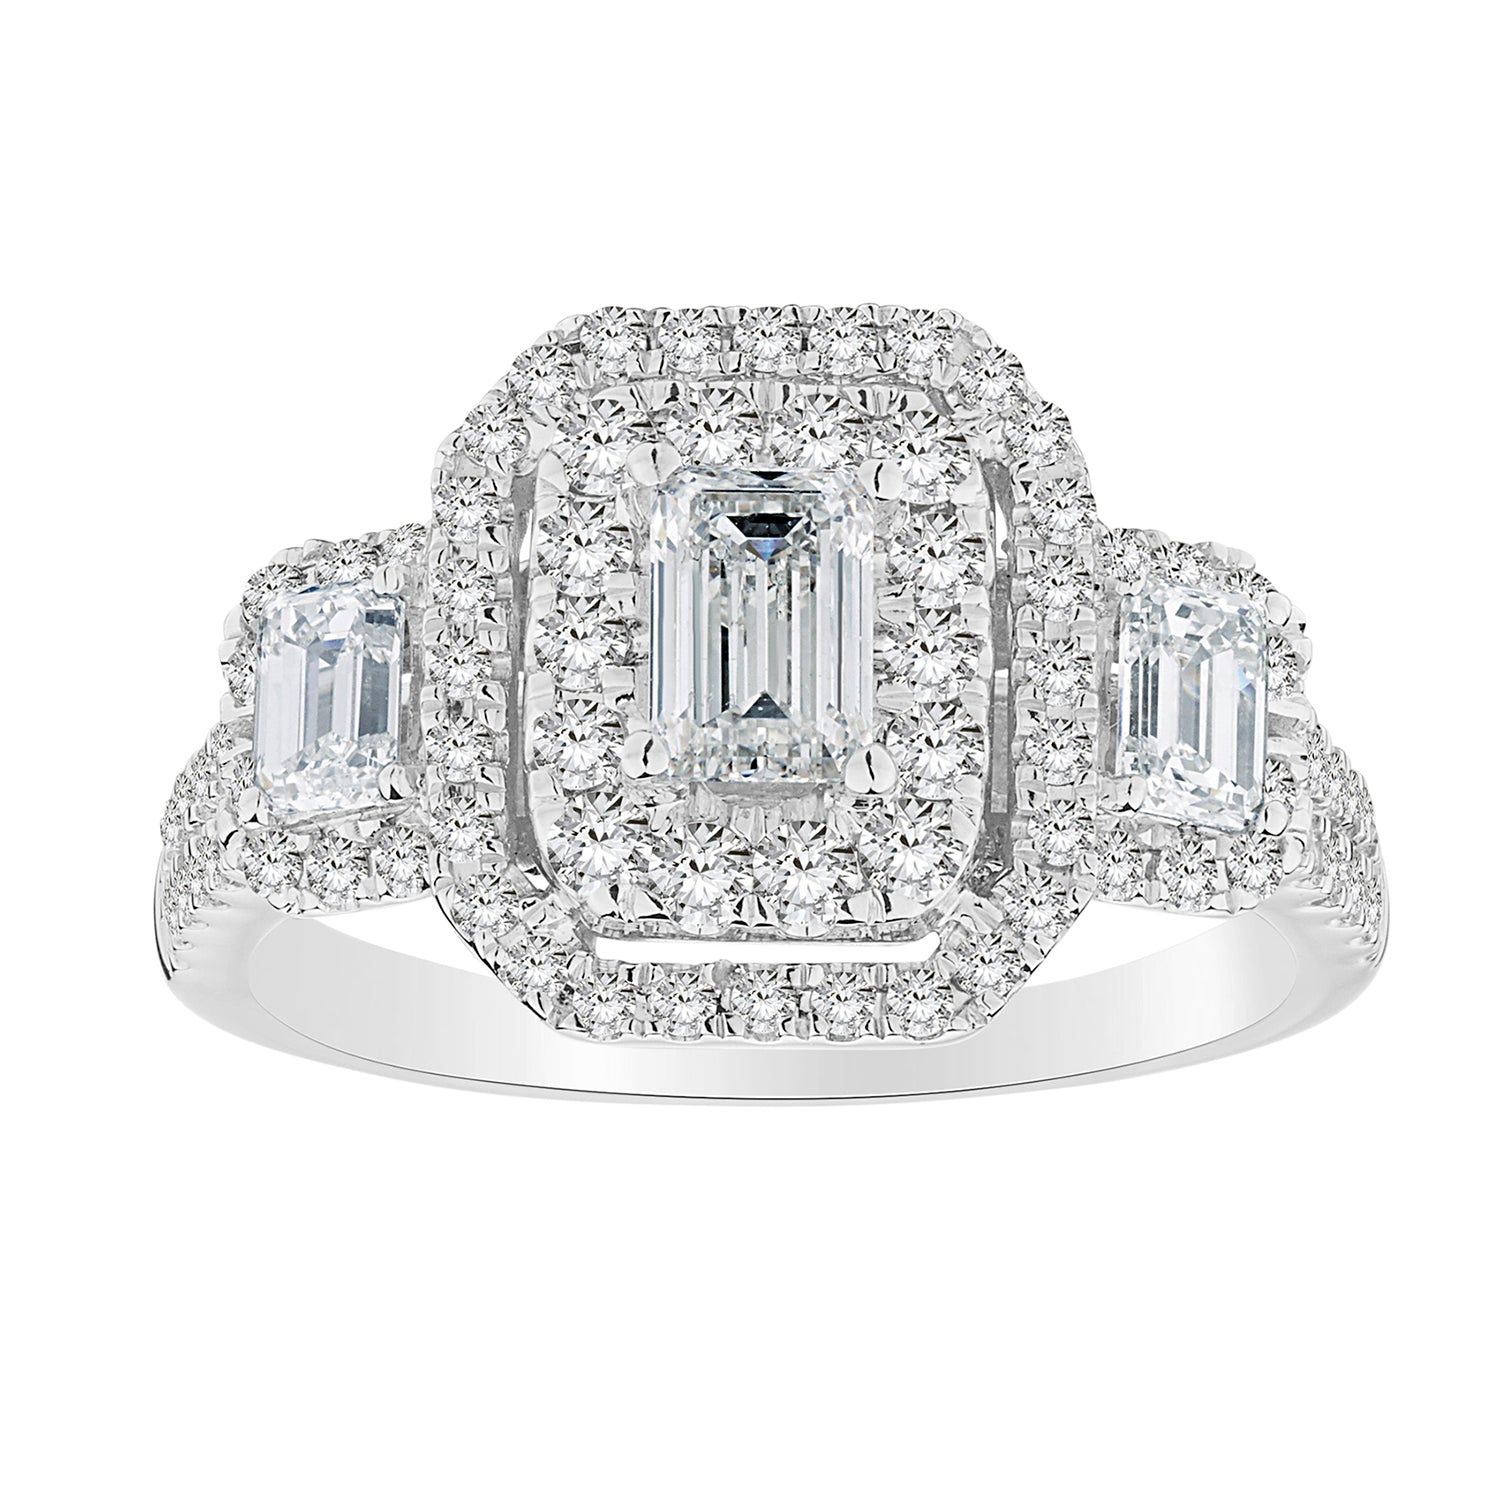 .50 Carat Emerald Cut Centre,  1.50 Carat Total Diamond Weight Engagement Ring,  14kt White Gold. Griffin Jewellery Designs